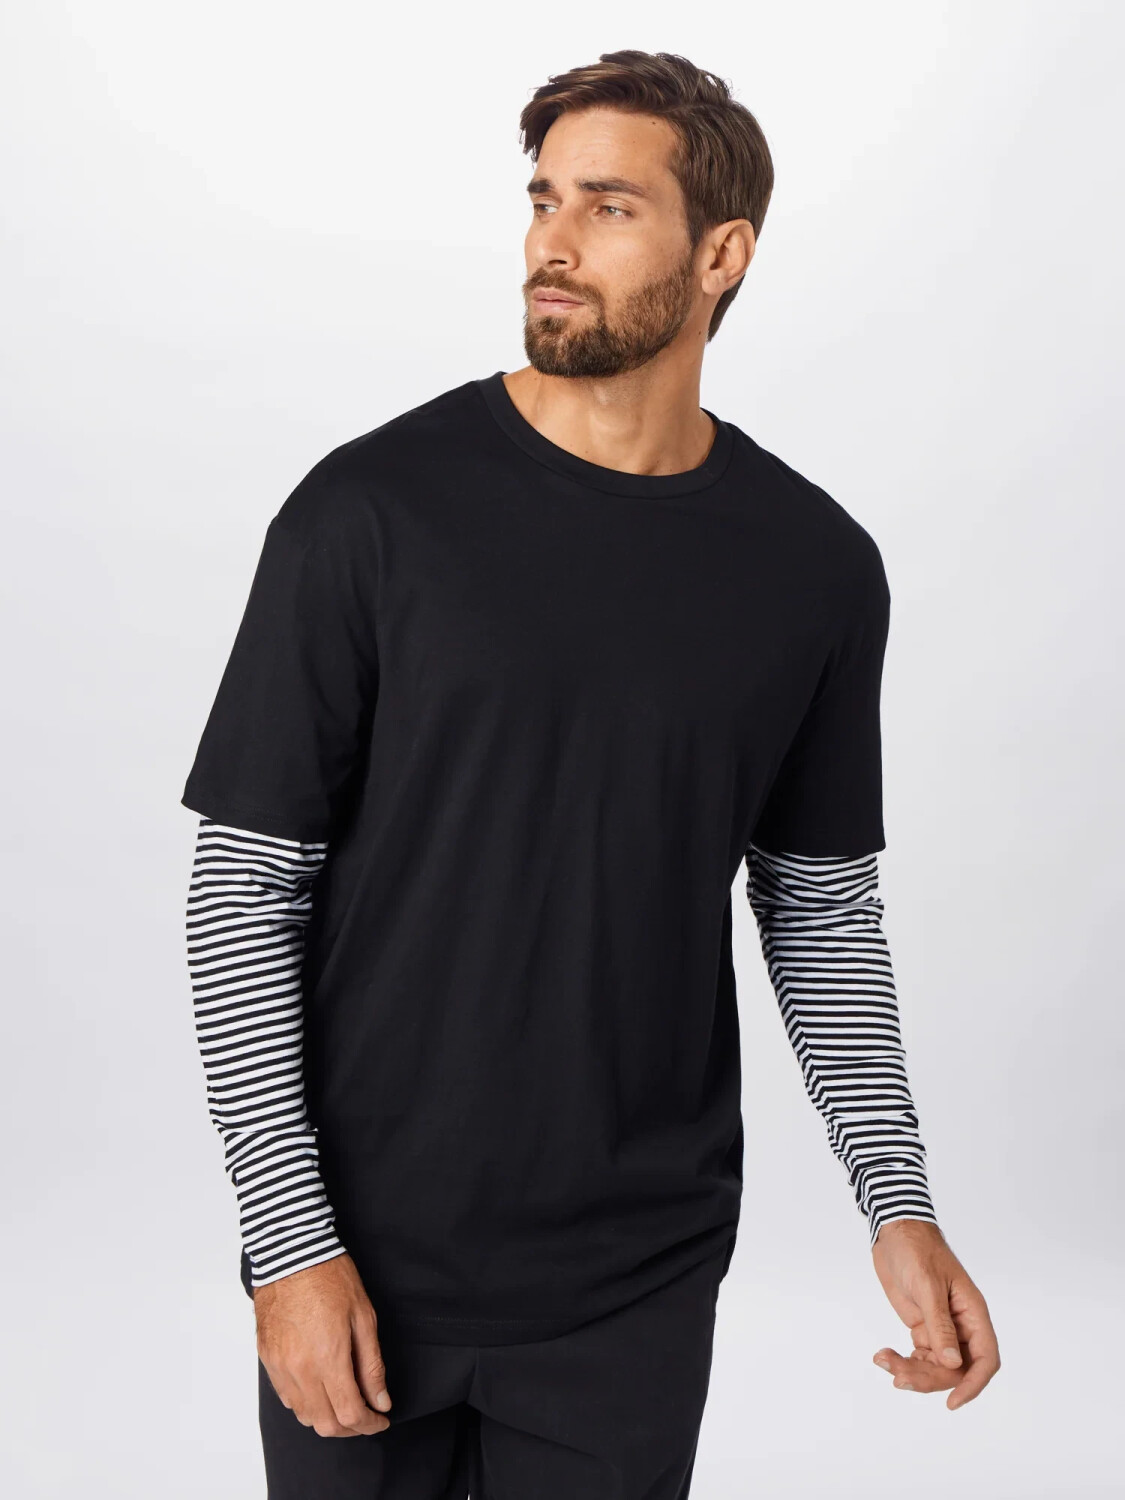 Buy Urban on Oversized (TB3498) black Striped from Tee Classics Double Deals Best LS Layer – £11.99 (Today)